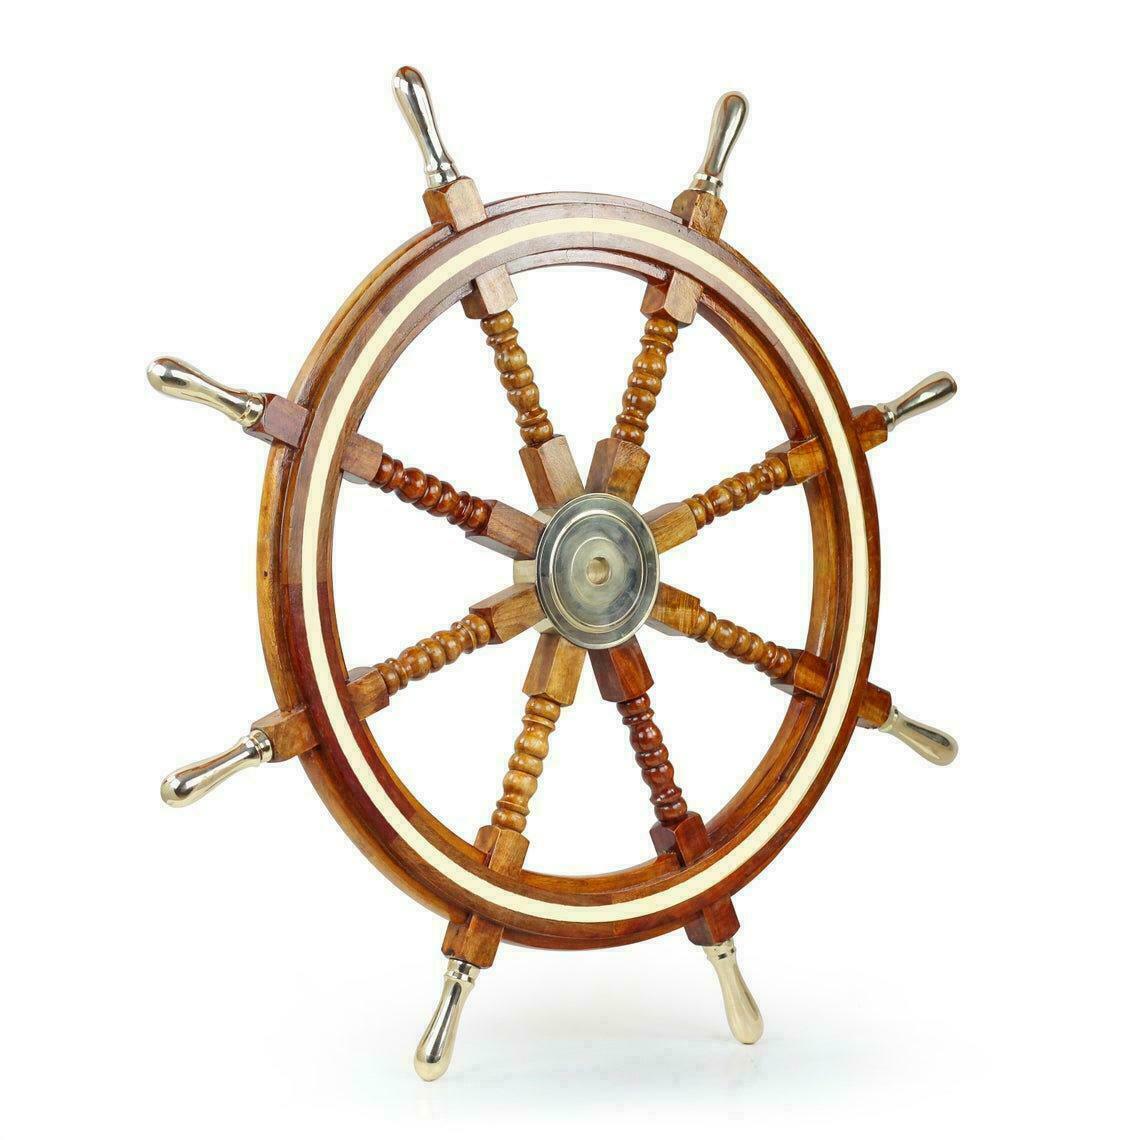 Nautical Wooden Ship Wheel 36" Boat Steering Collectible Wall Decor